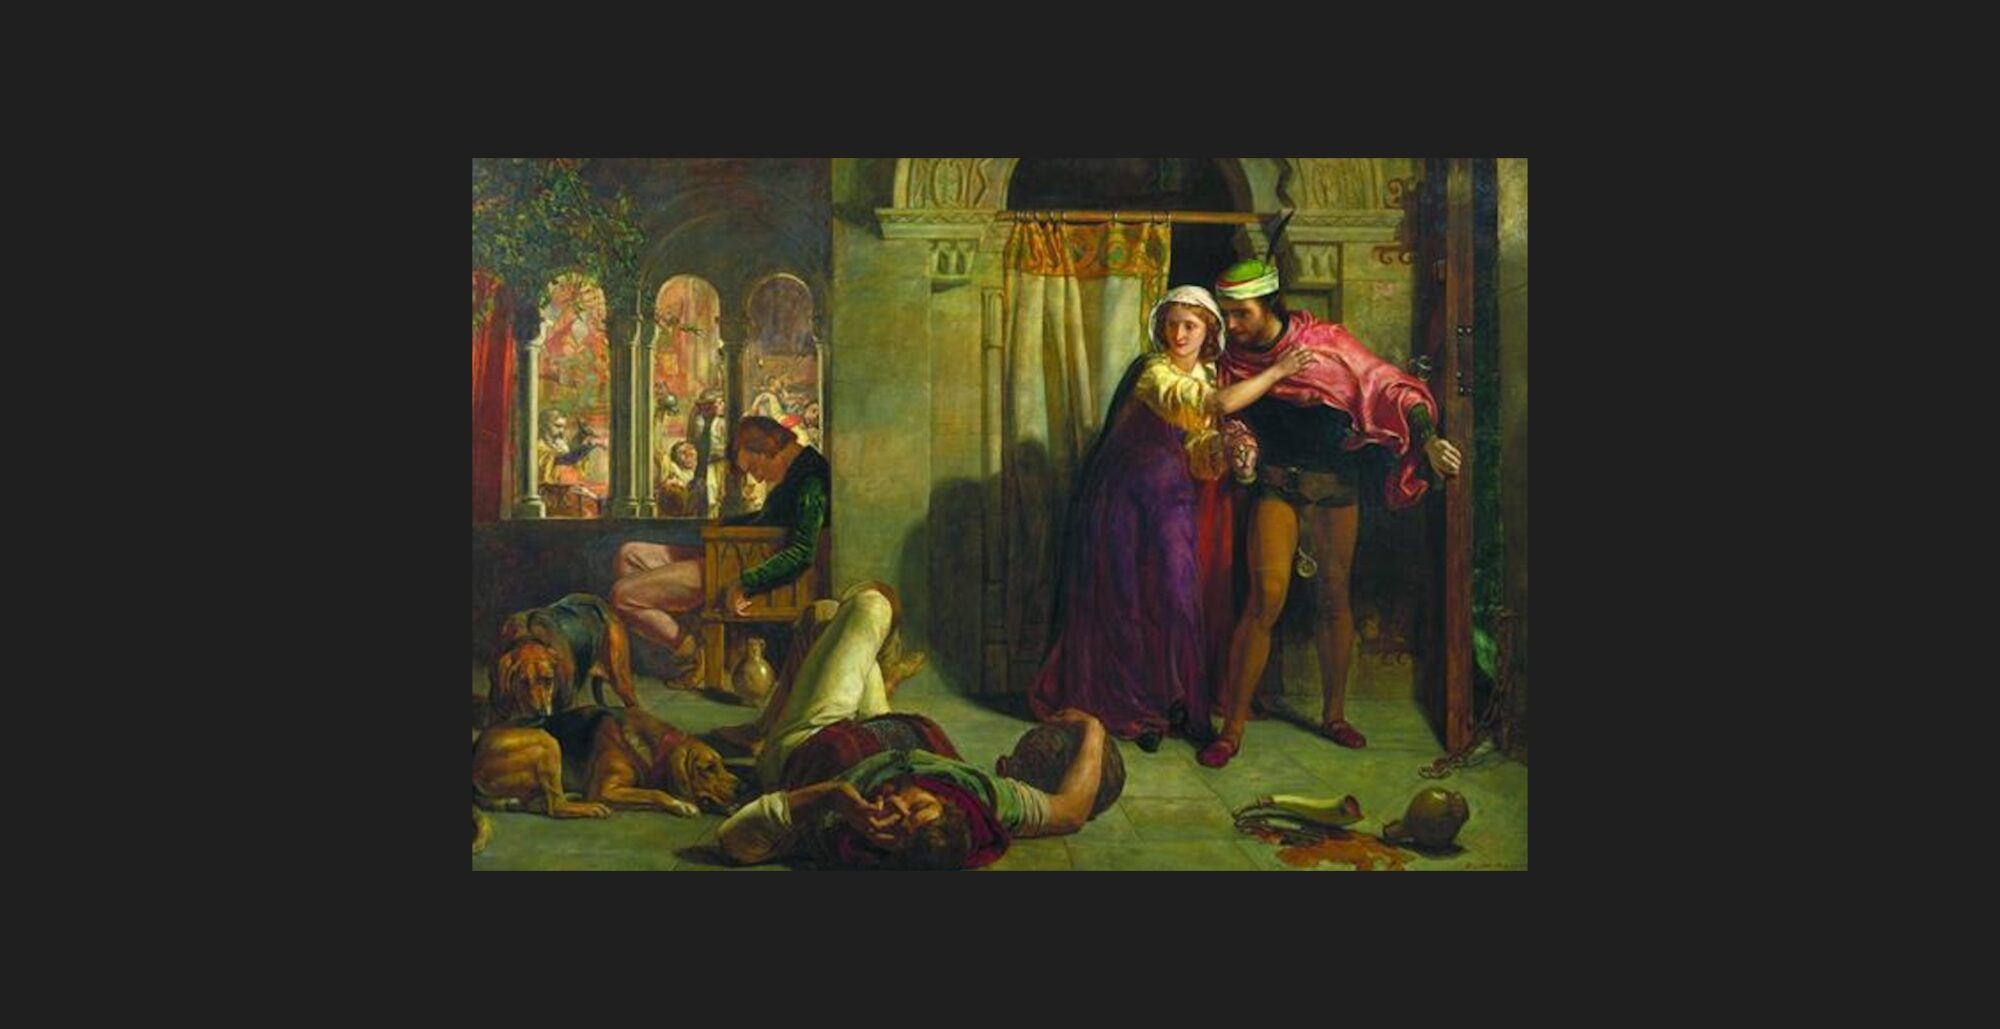 'The Eve of St Agnes', Holman Hunt, William (1848) - dramatic scene with a man lyig on the floor, dogs in the background